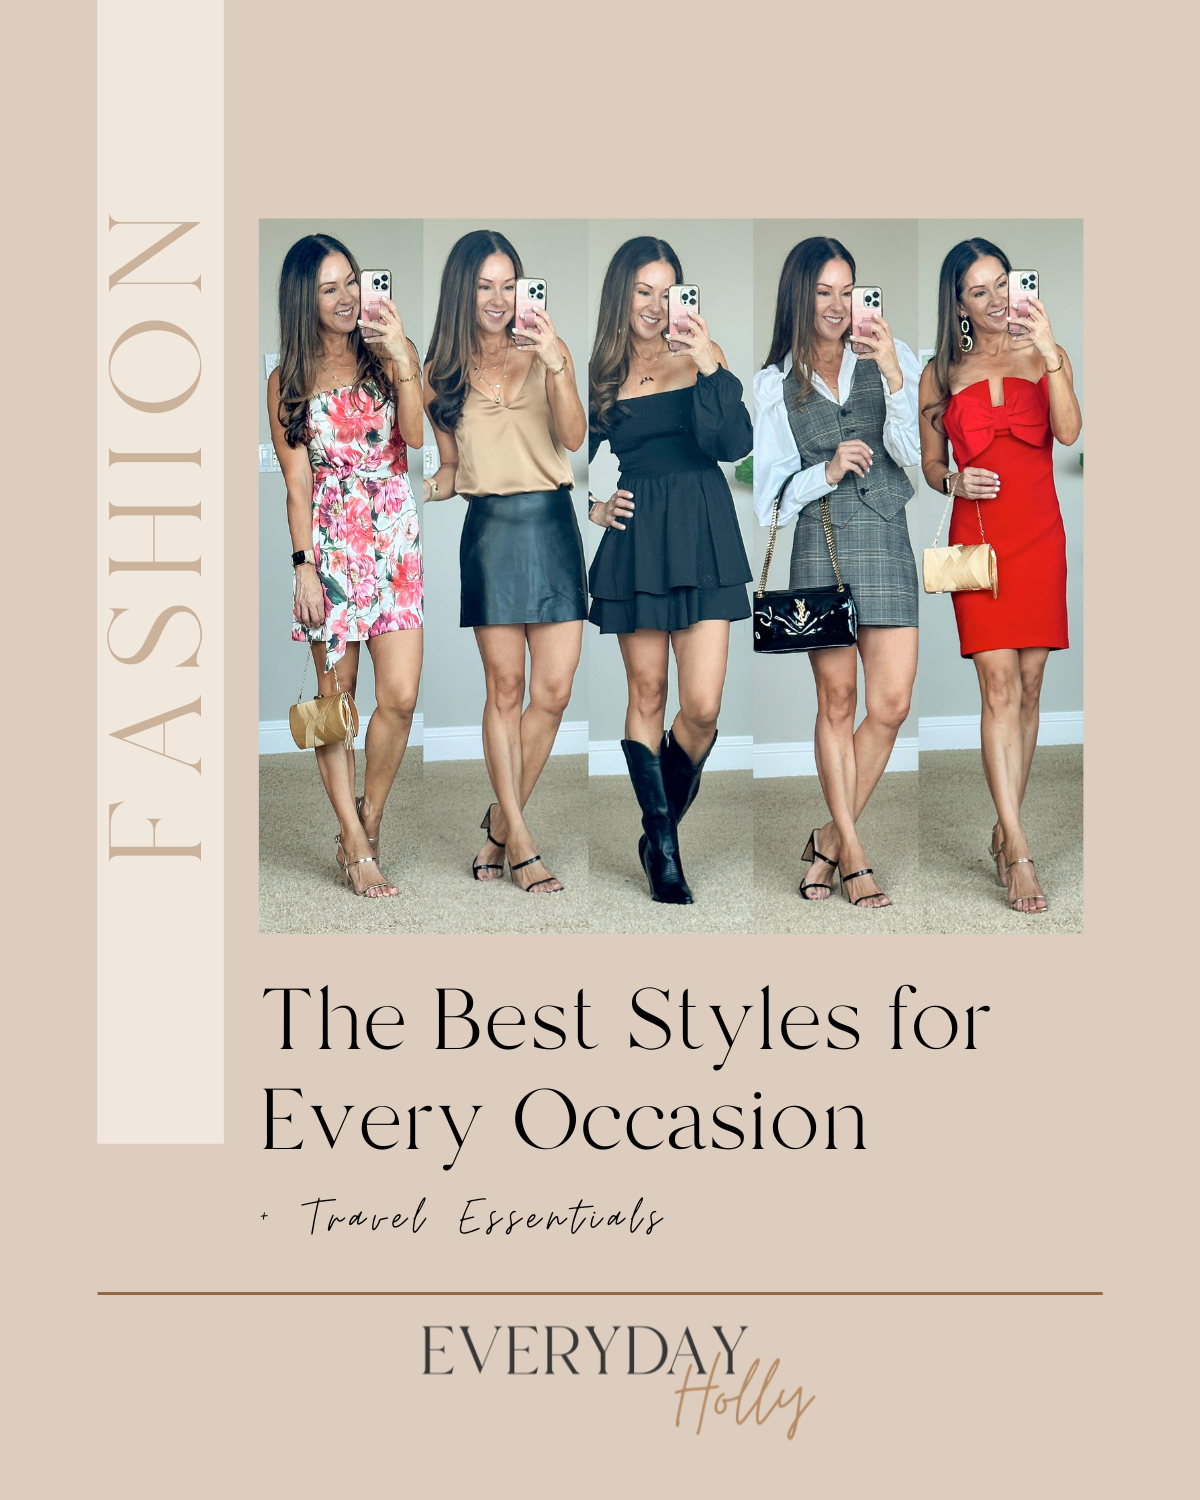 The Best Styles for Every Occasion + Travel Essentials | #best #styles #every #occasion #travel #essentials #musthaves #dress #romper #heels #skort #express #amazon